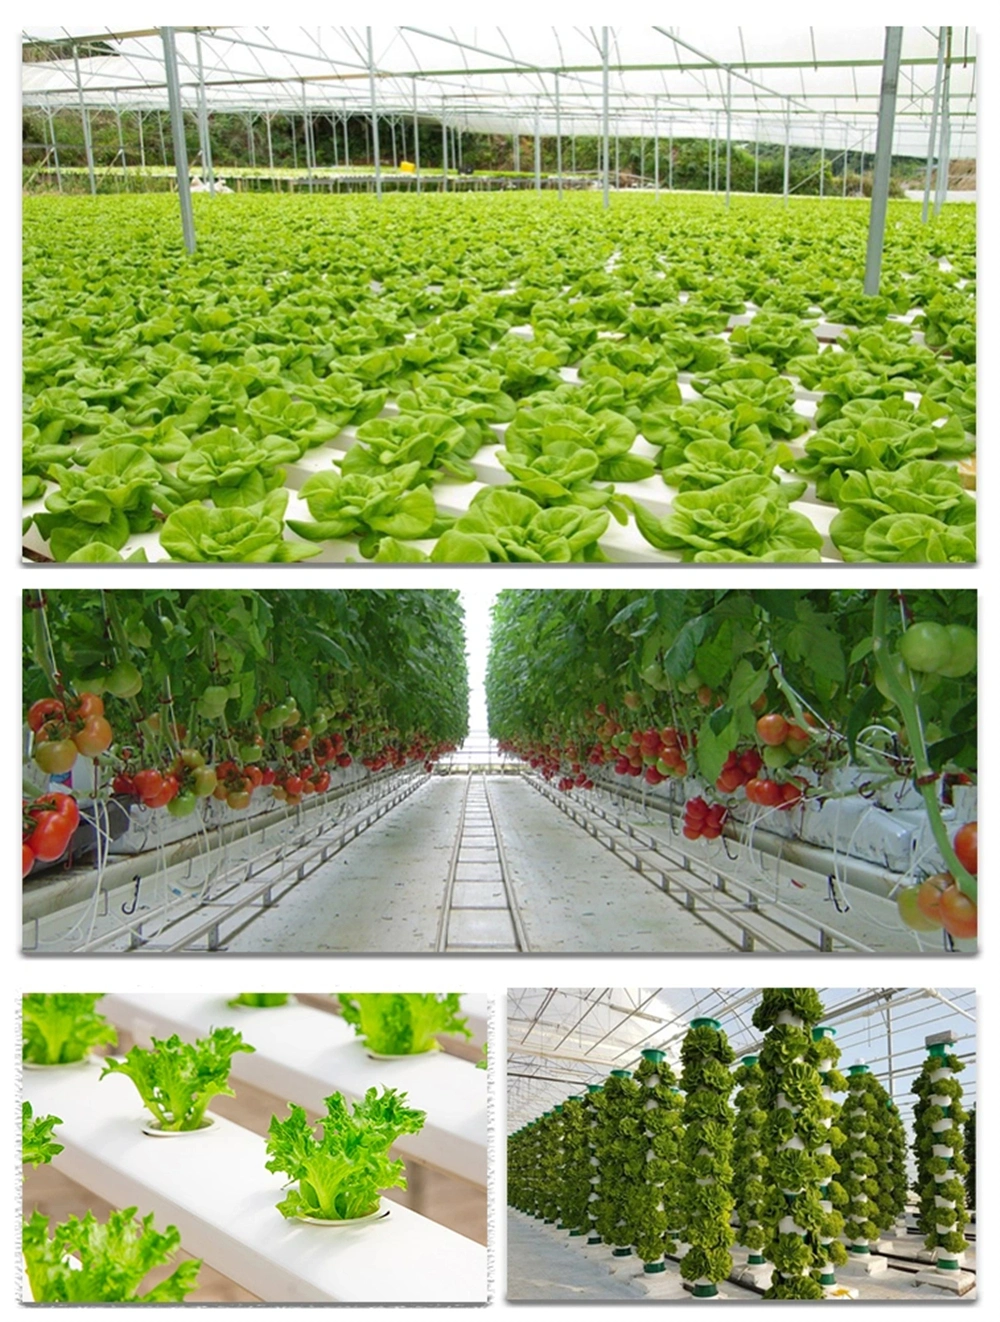 Hydroponic Farming/Planting Multi-Span Gothic Film Greenhouse for Vegetable/Fruit/Flower/Cucumber/Tomato Growing